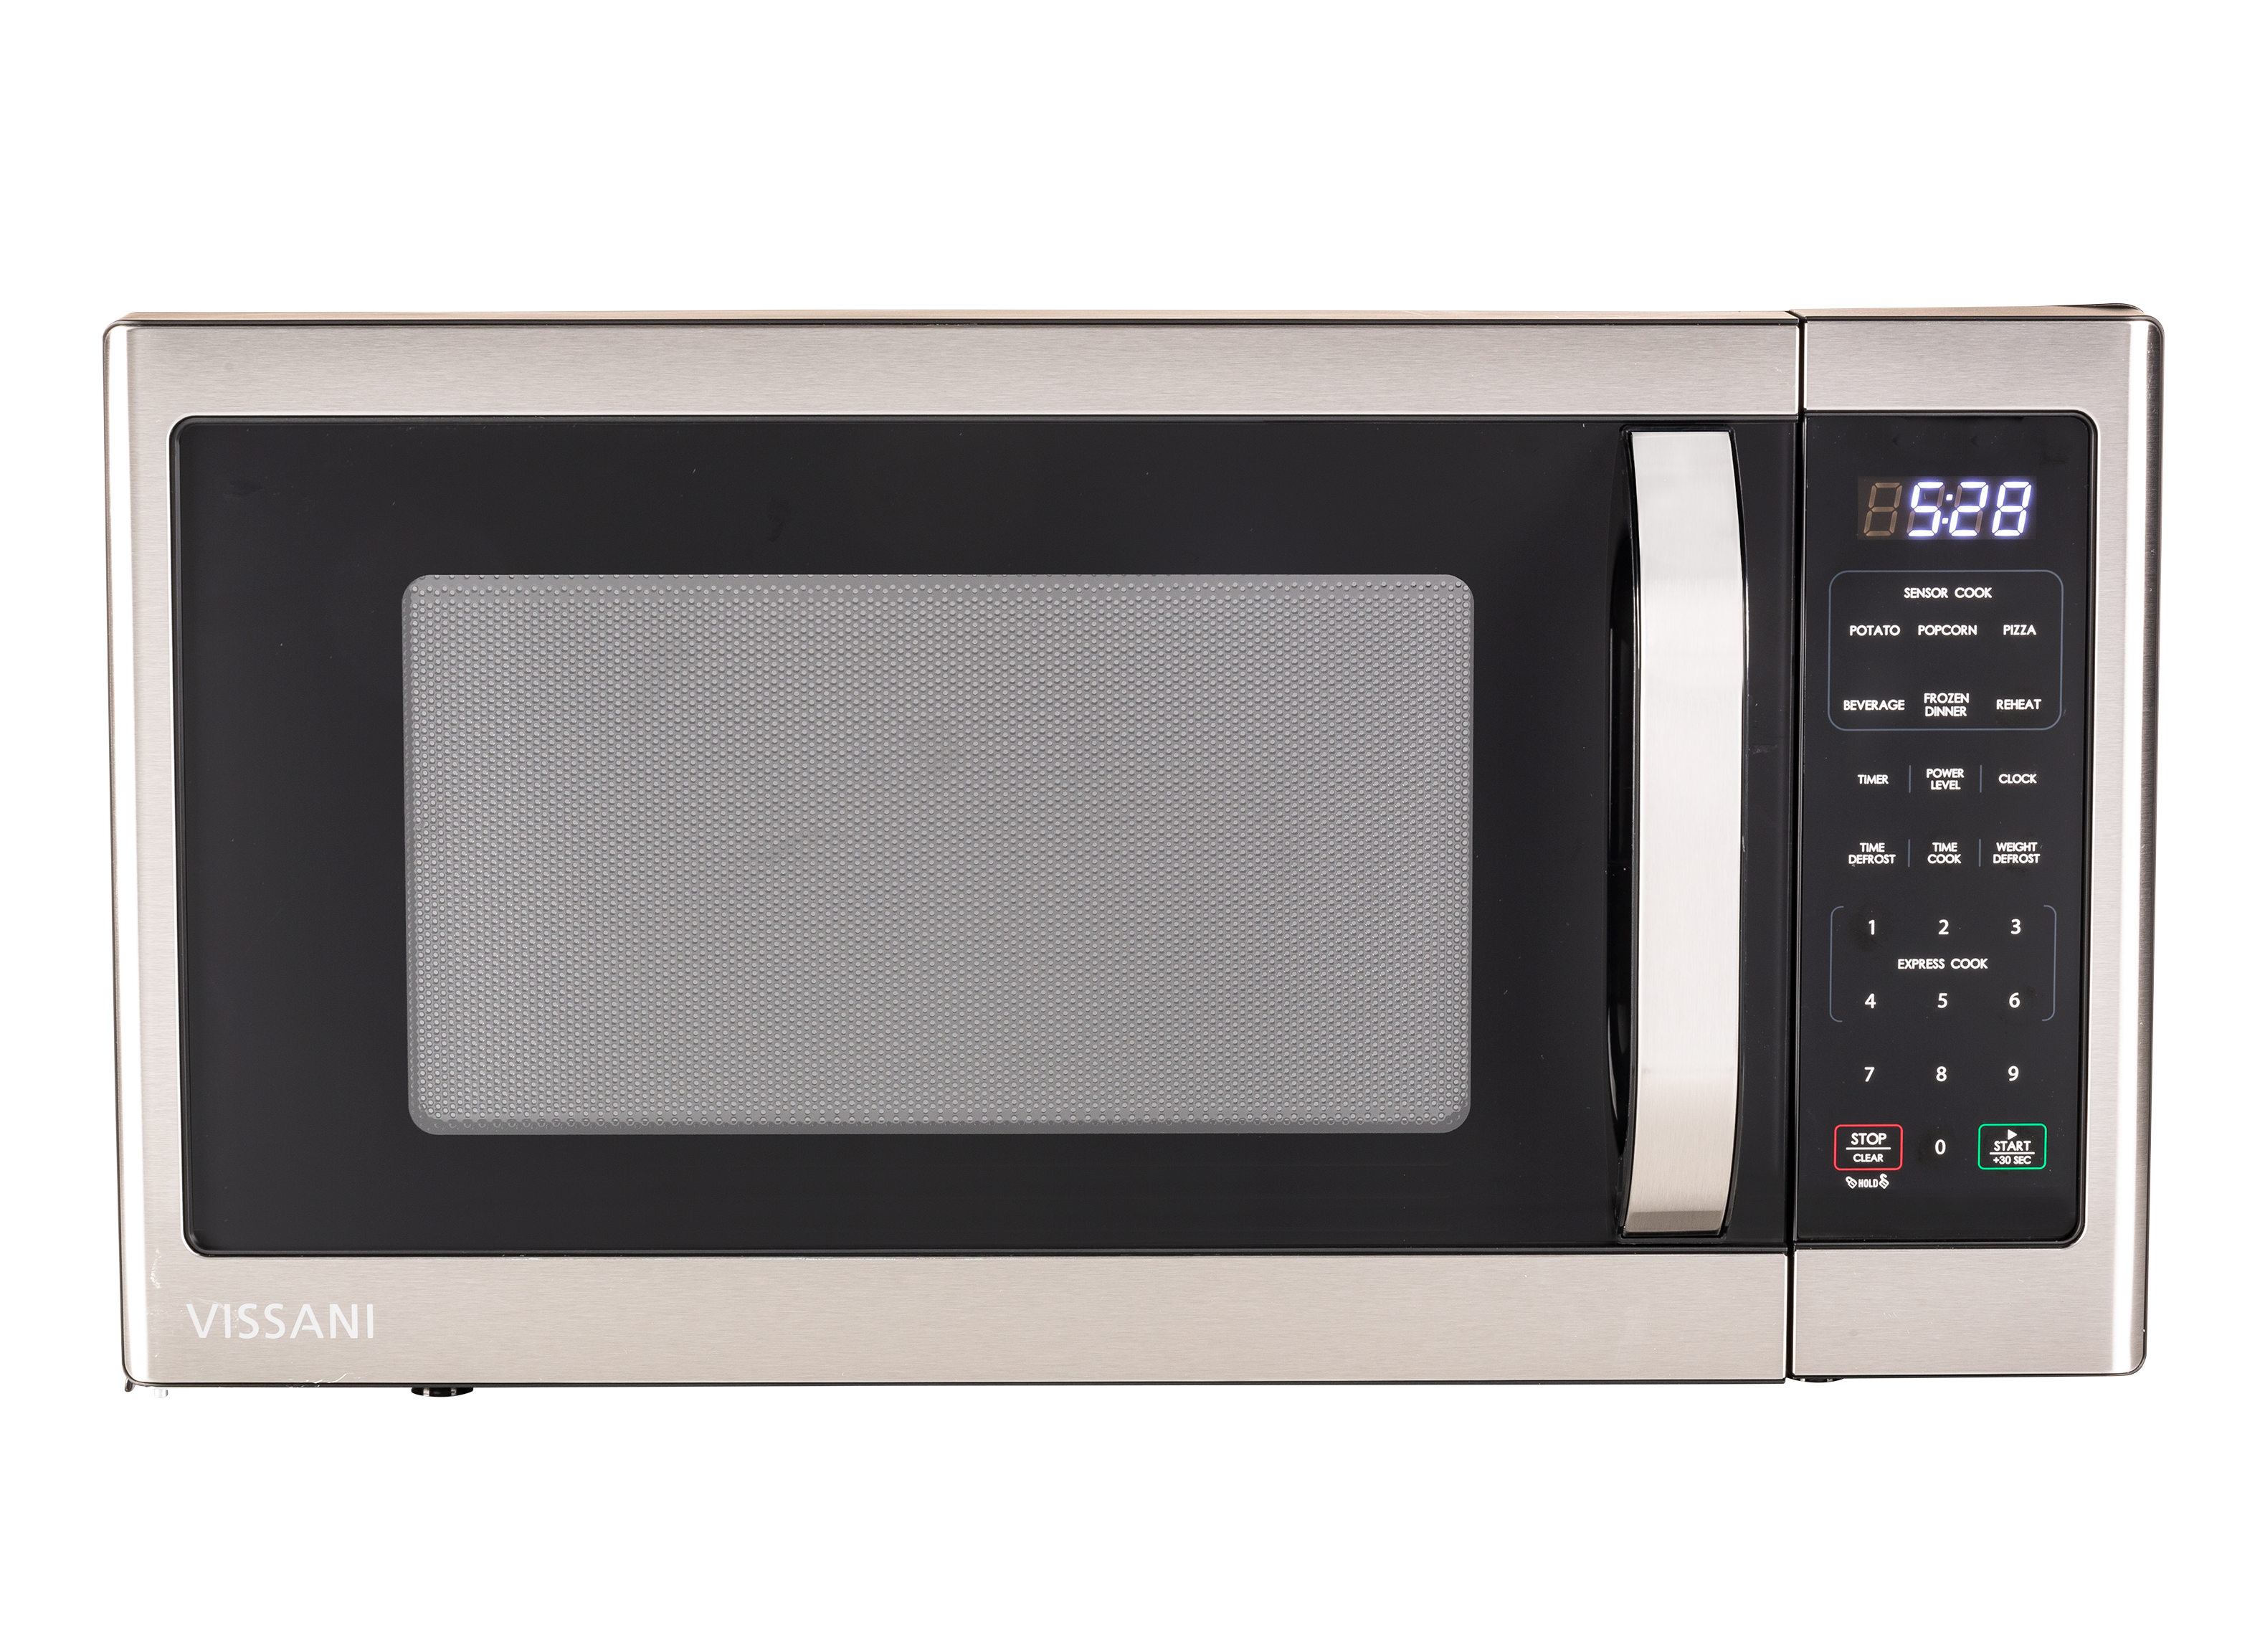 https://crdms.images.consumerreports.org/prod/products/cr/models/406564-large-countertop-microwaves-vissani-vscmwe16s2sw-11-10030419.png